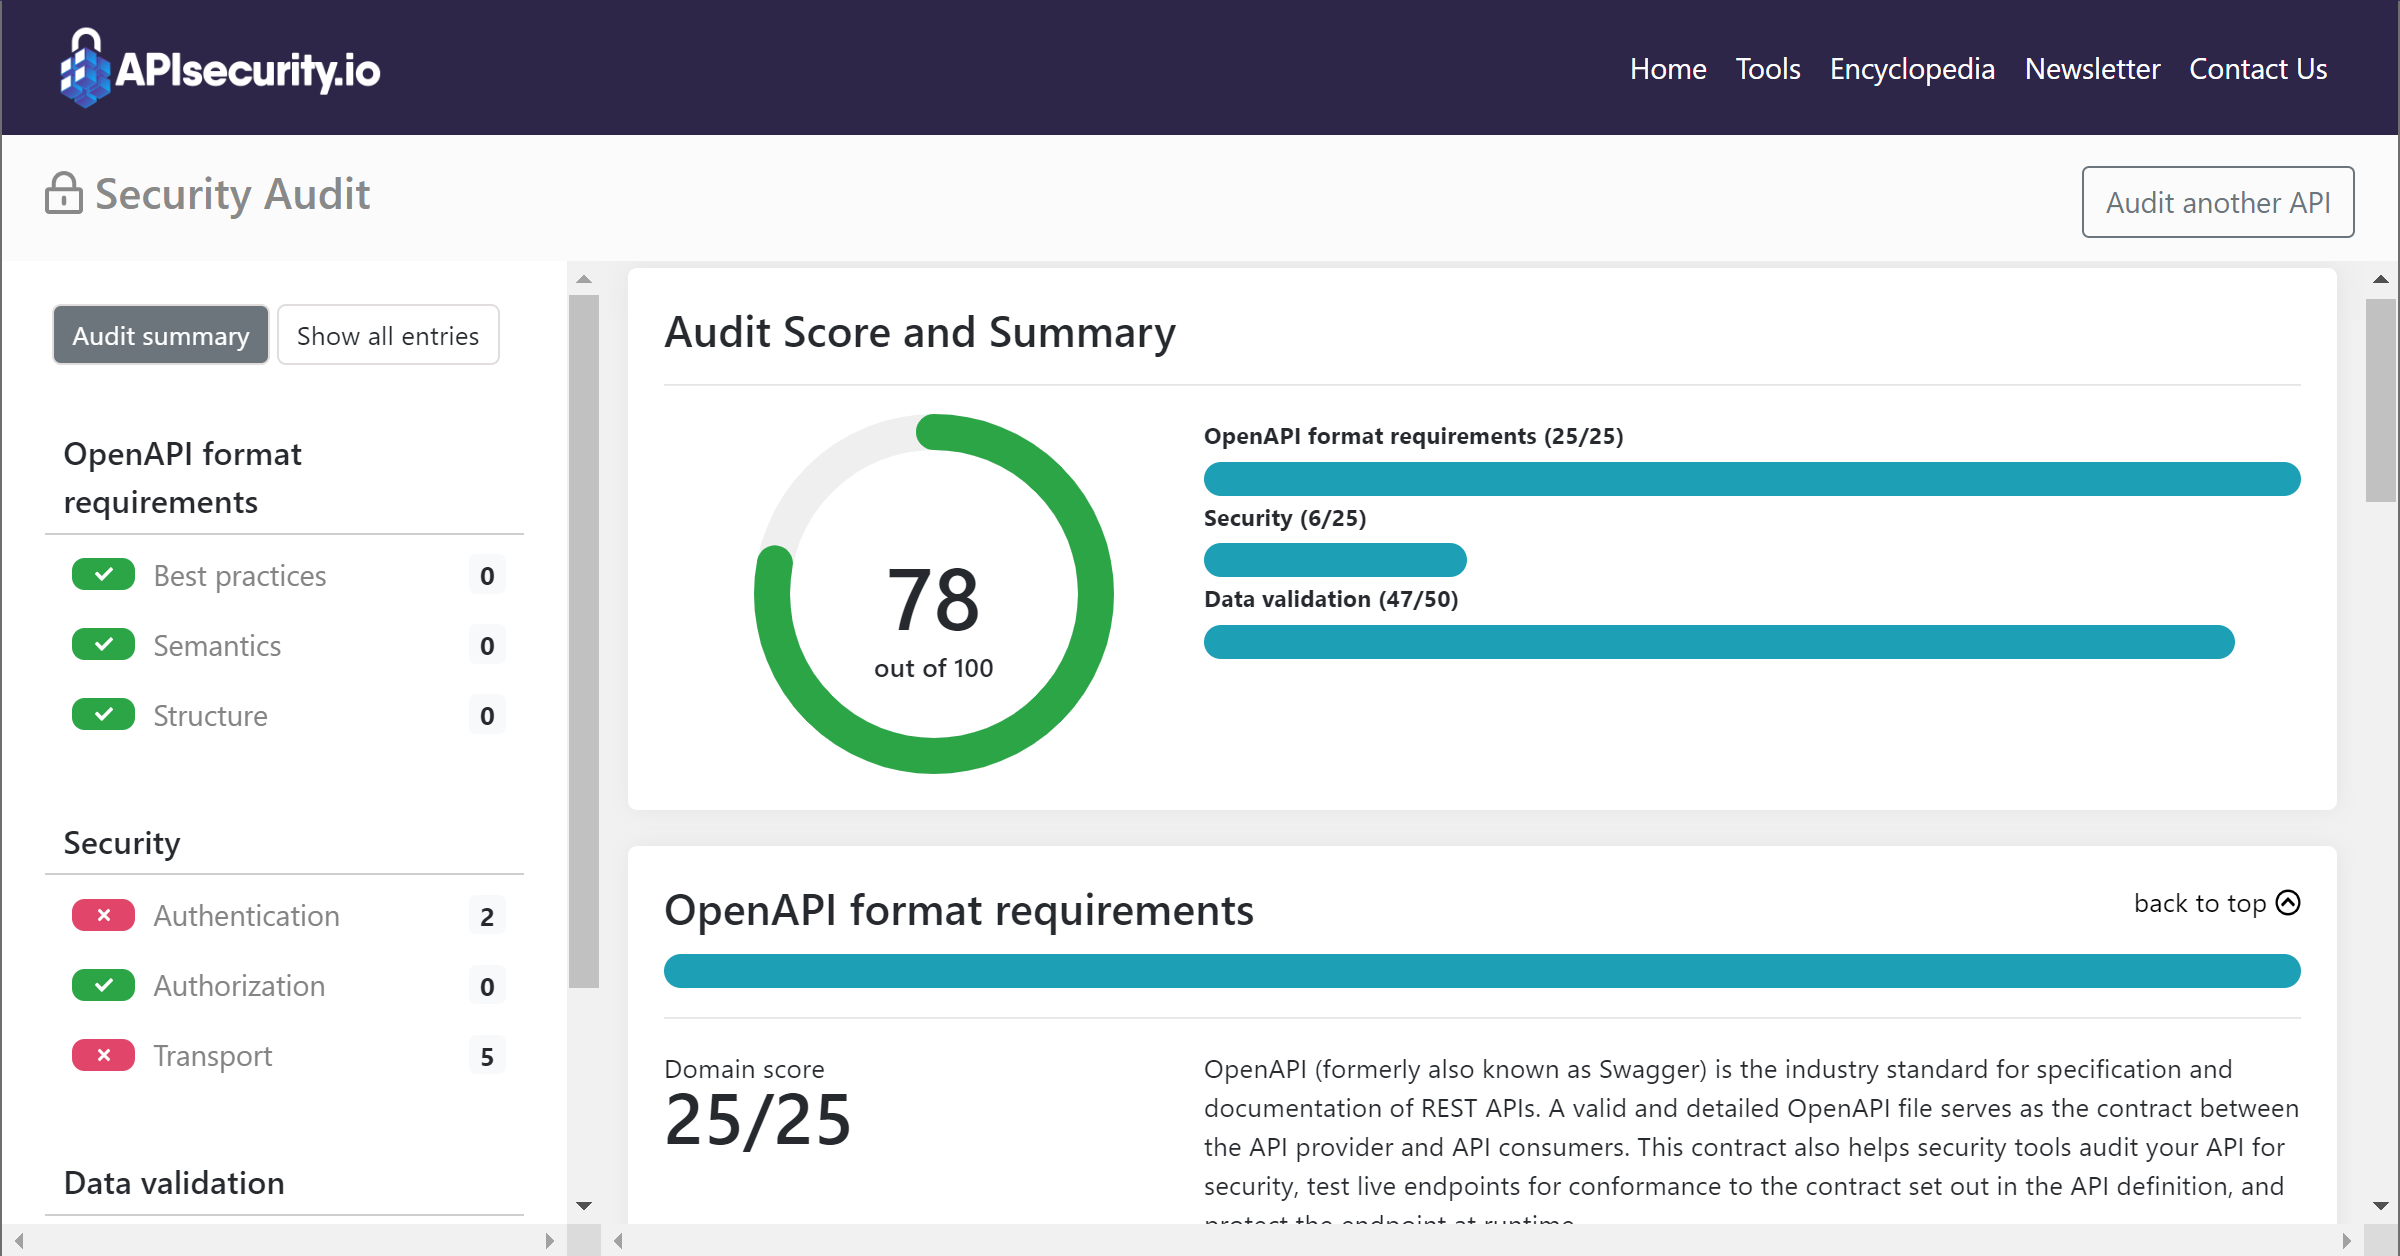 Summary of API contract security audit: OpenAPI format requirements, security, data validation